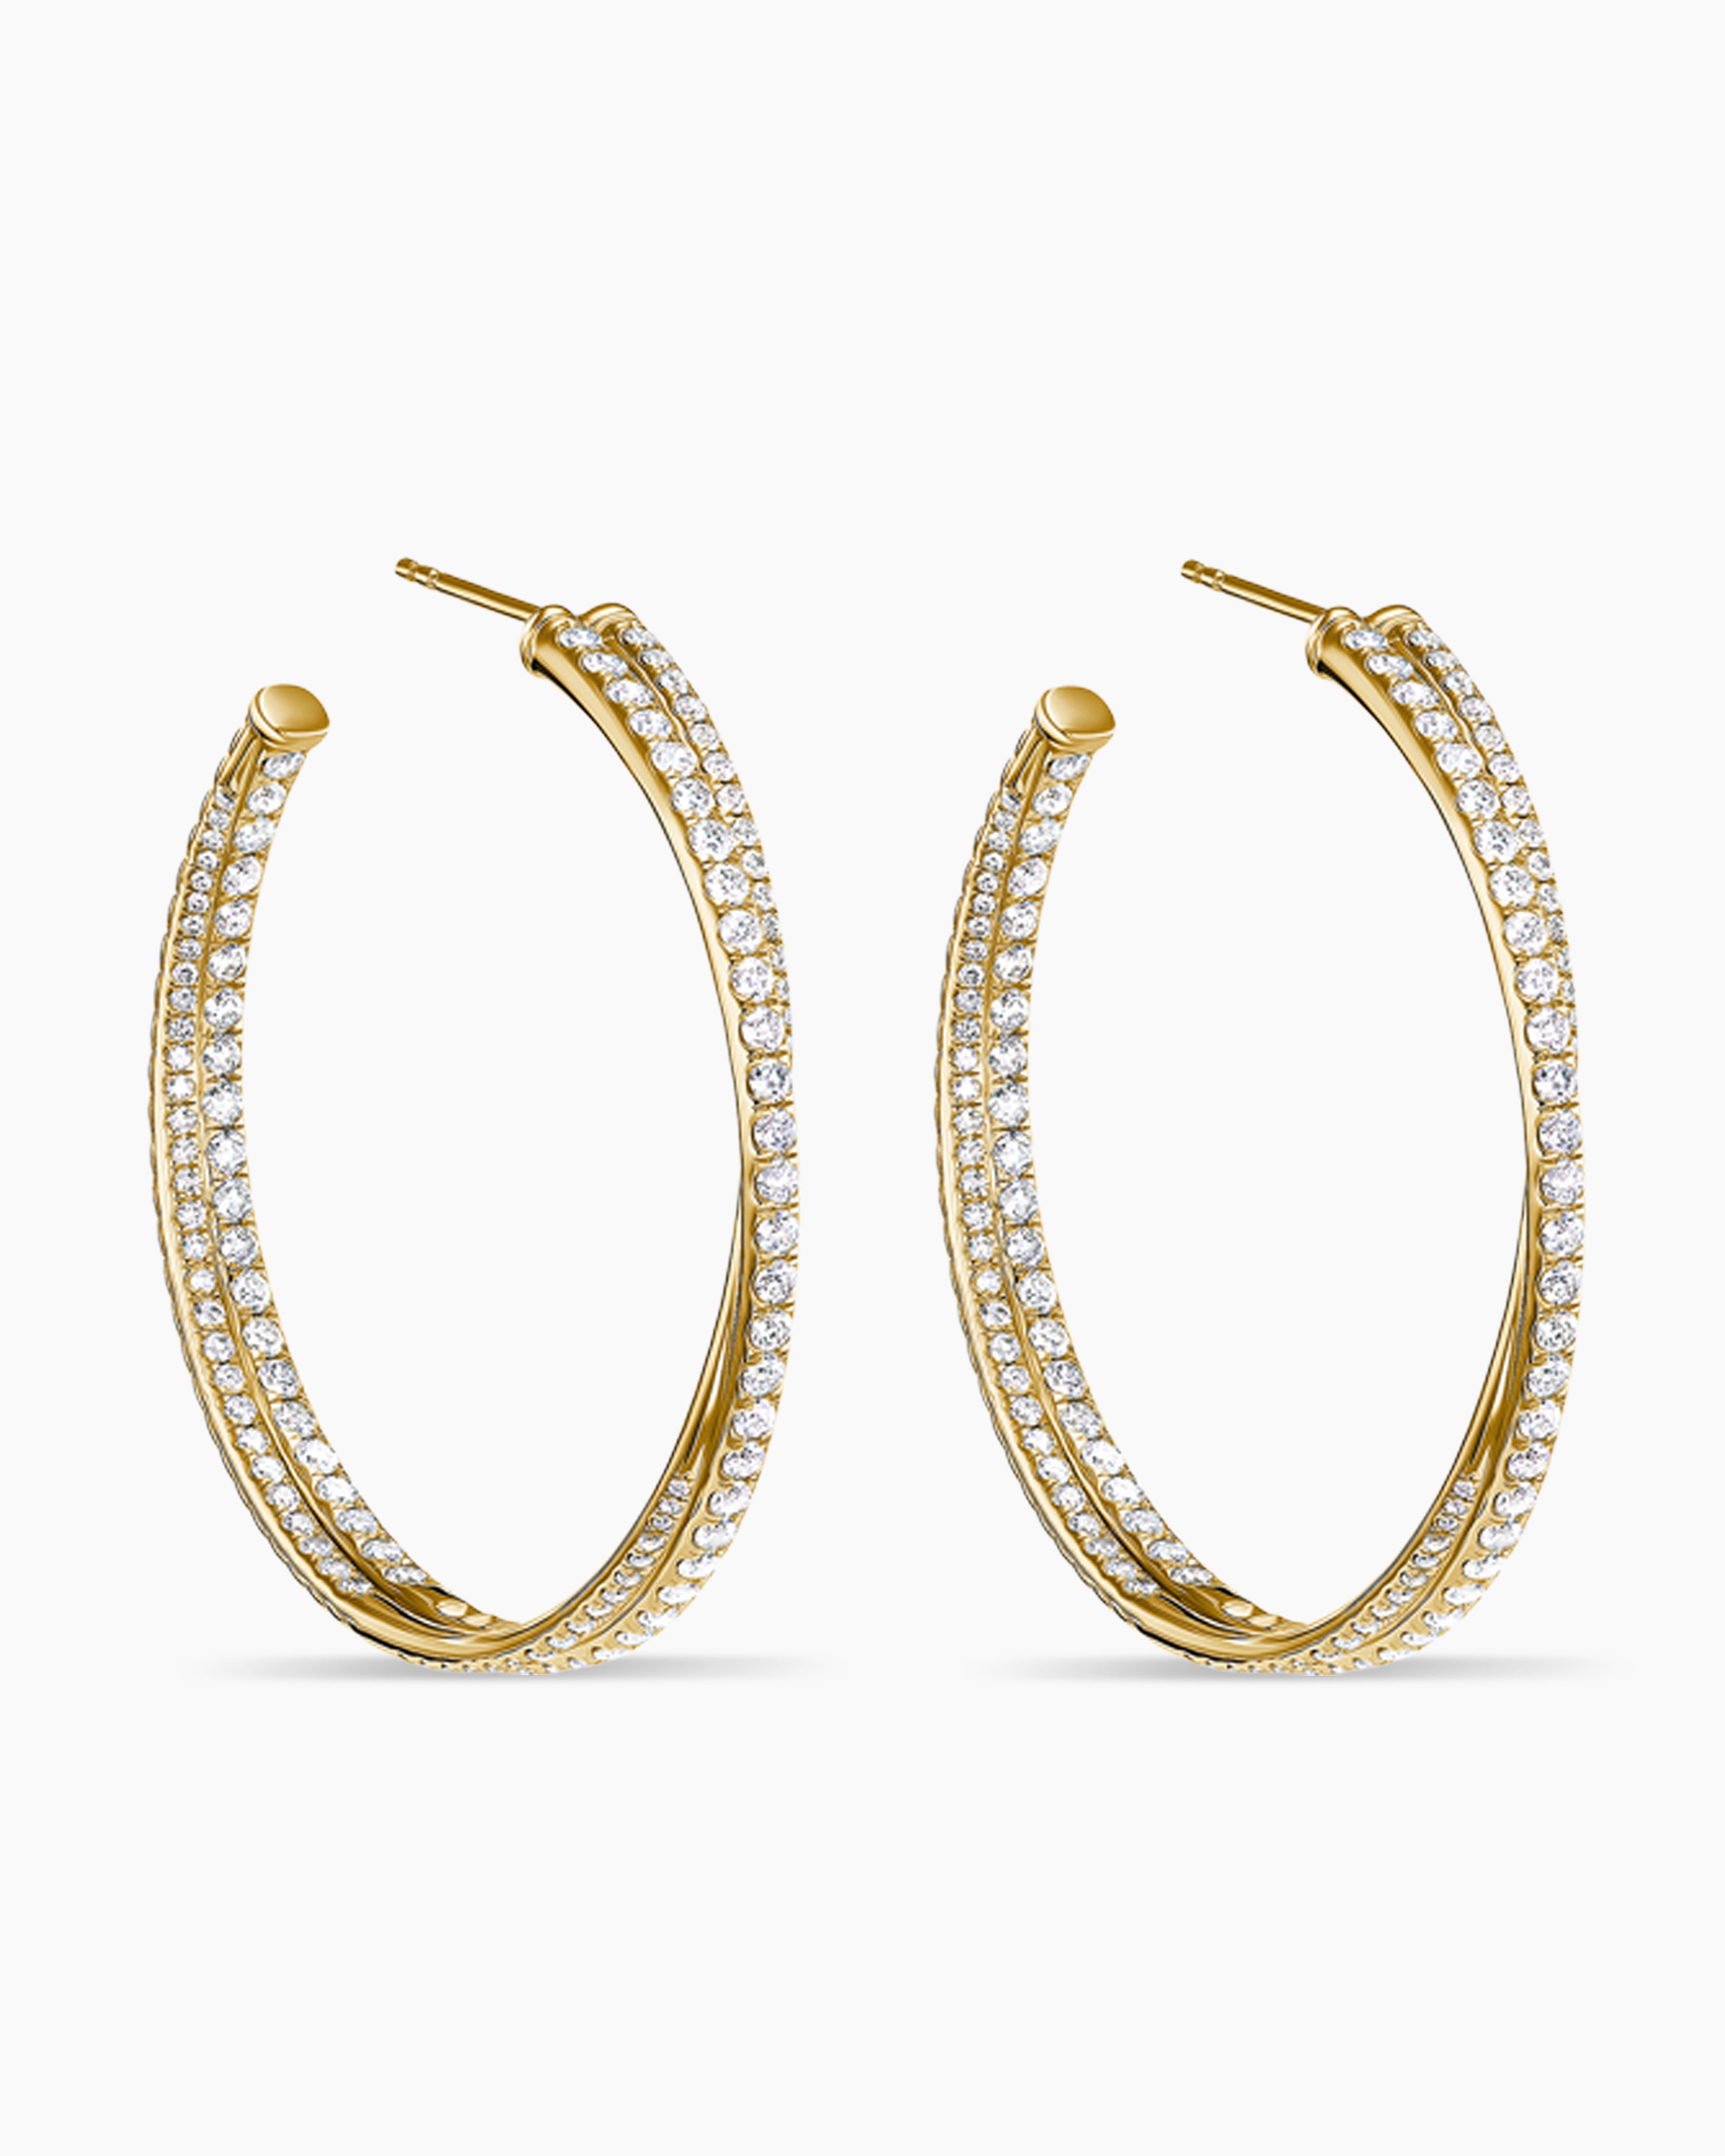 Gold Hoop Earrings 14k Yellow White Gold Satin Diamond-cut Square Tube Hoop  Earrings 1.75mm Thickness - Roy Rose Jewelry